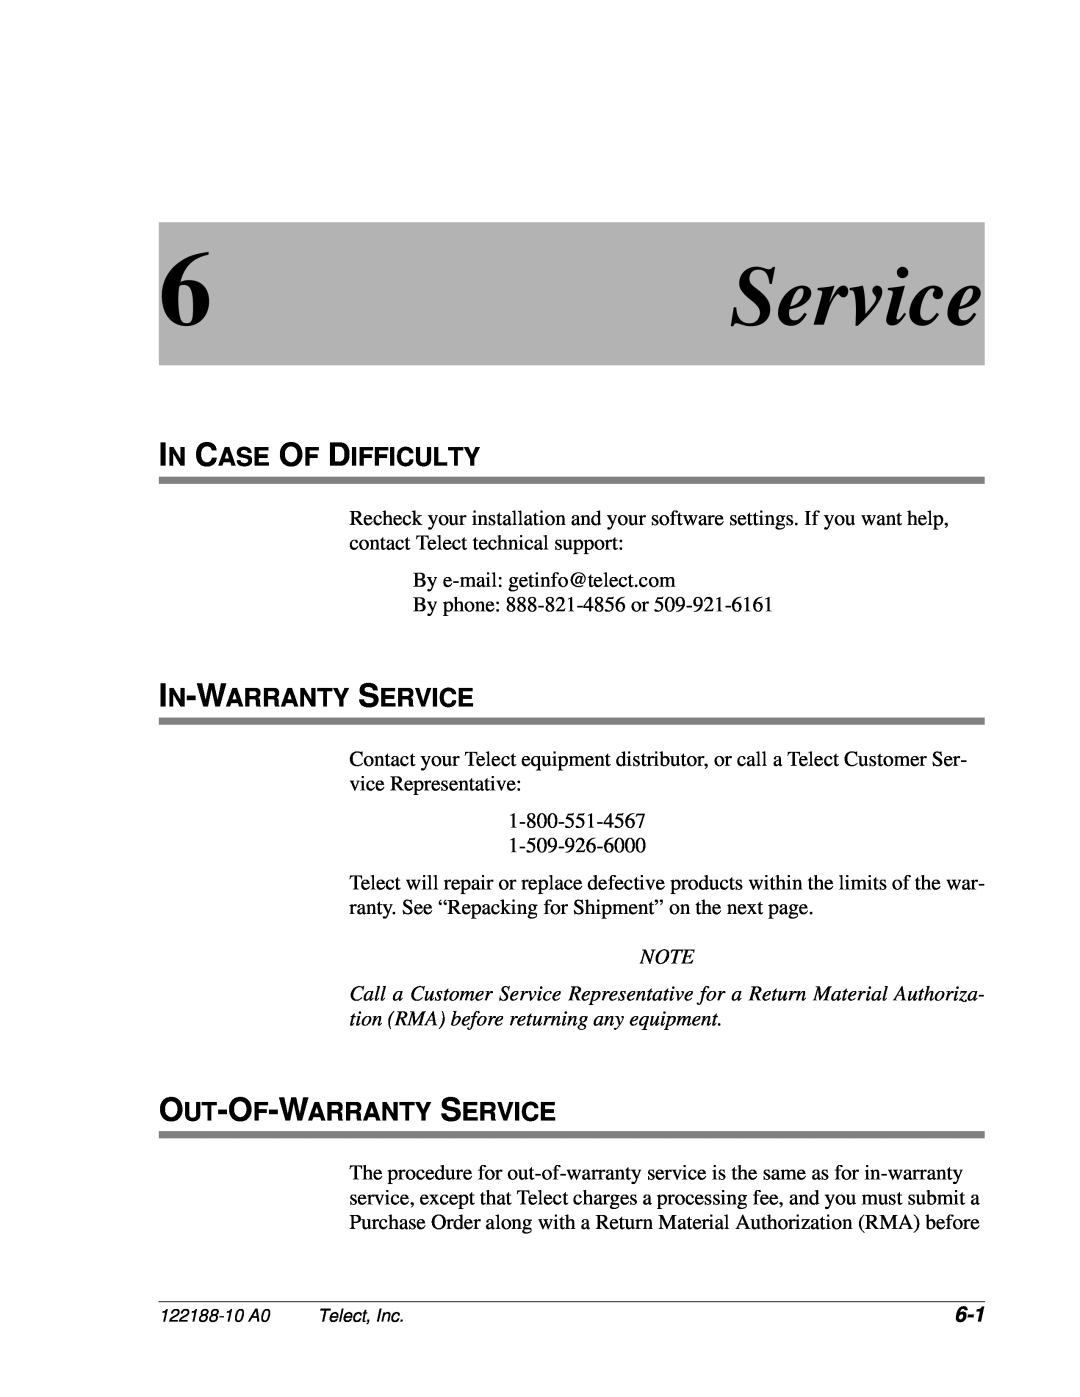 Telect MIX 56 user manual In Case Of Difficulty, In-Warranty Service, Out-Of-Warranty Service 